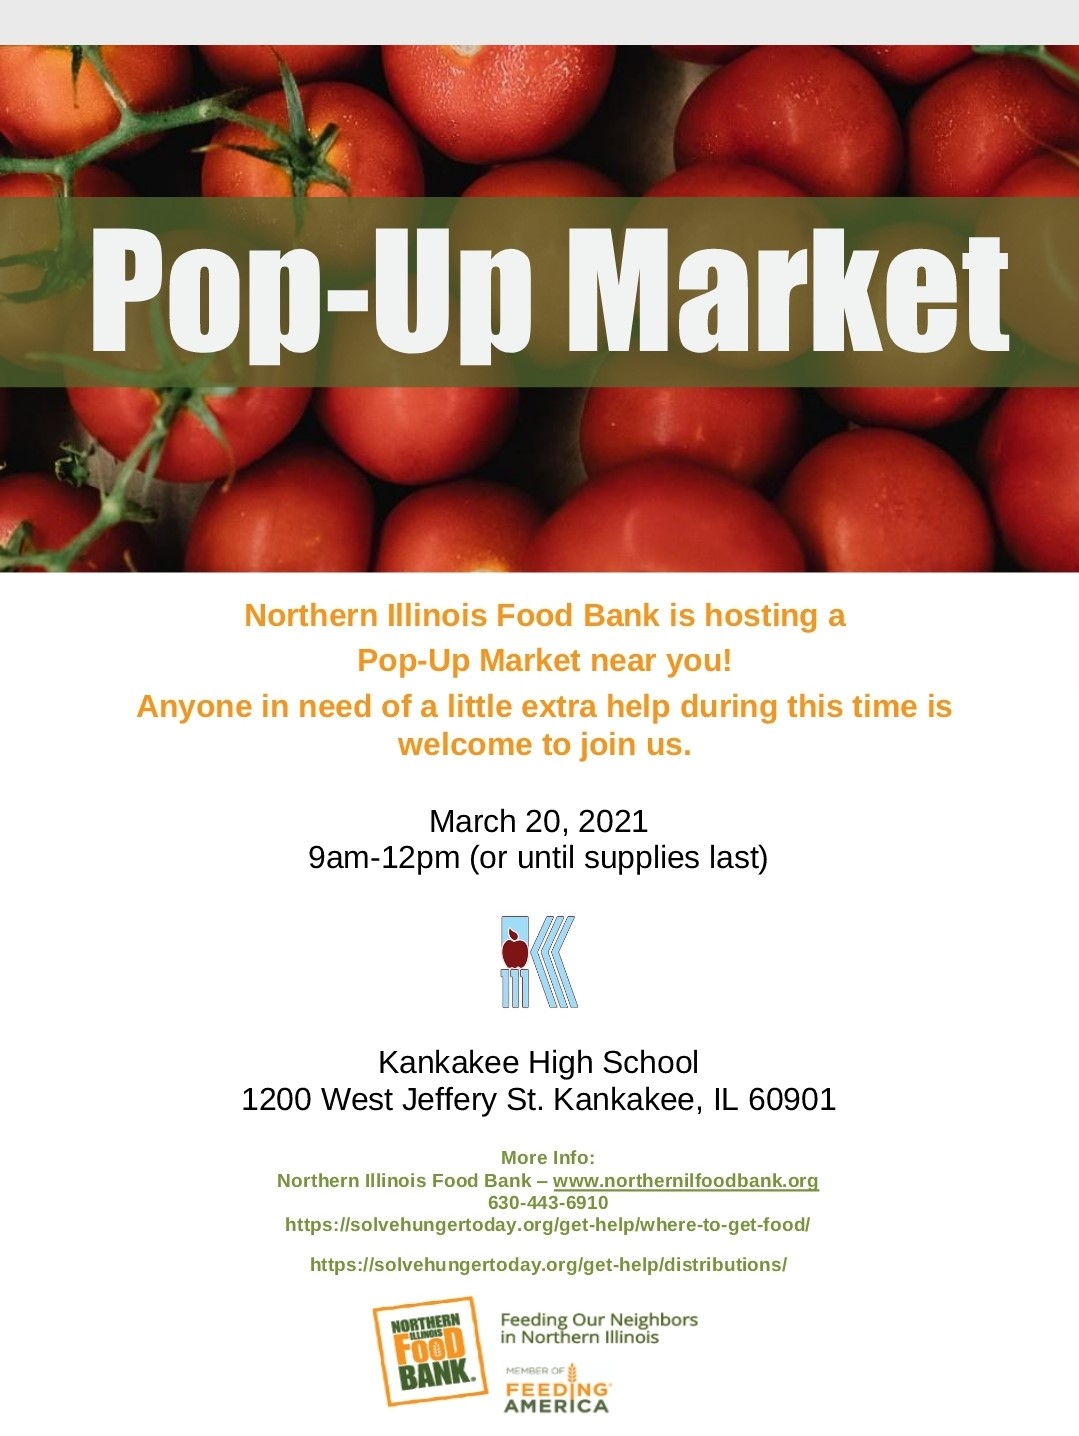 Northern Illinois Food Bank is hosting a Pop-Up Market near you!